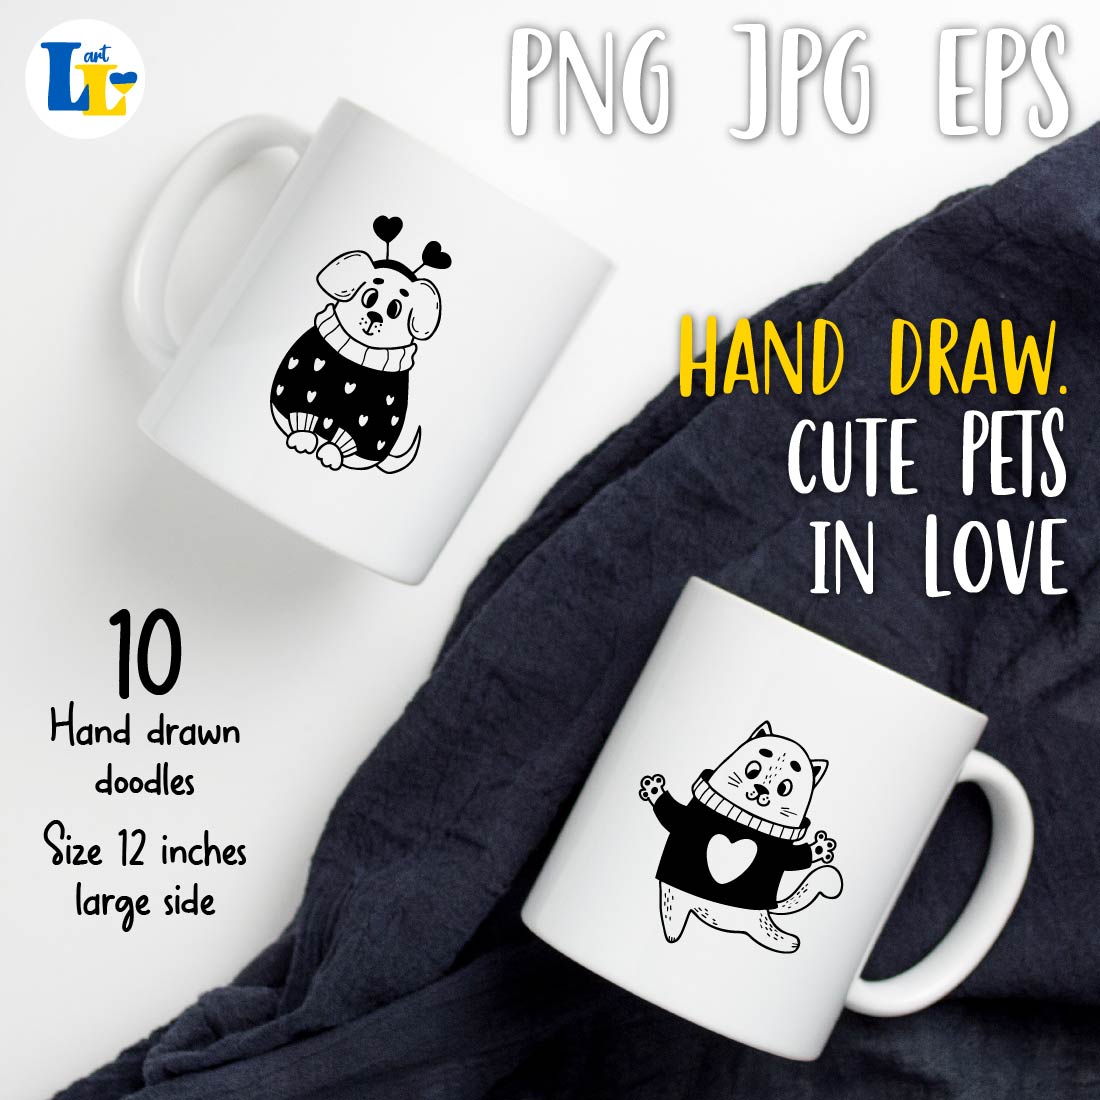 Cute in Love Pets Hand Drawn Doodle Design cover image.